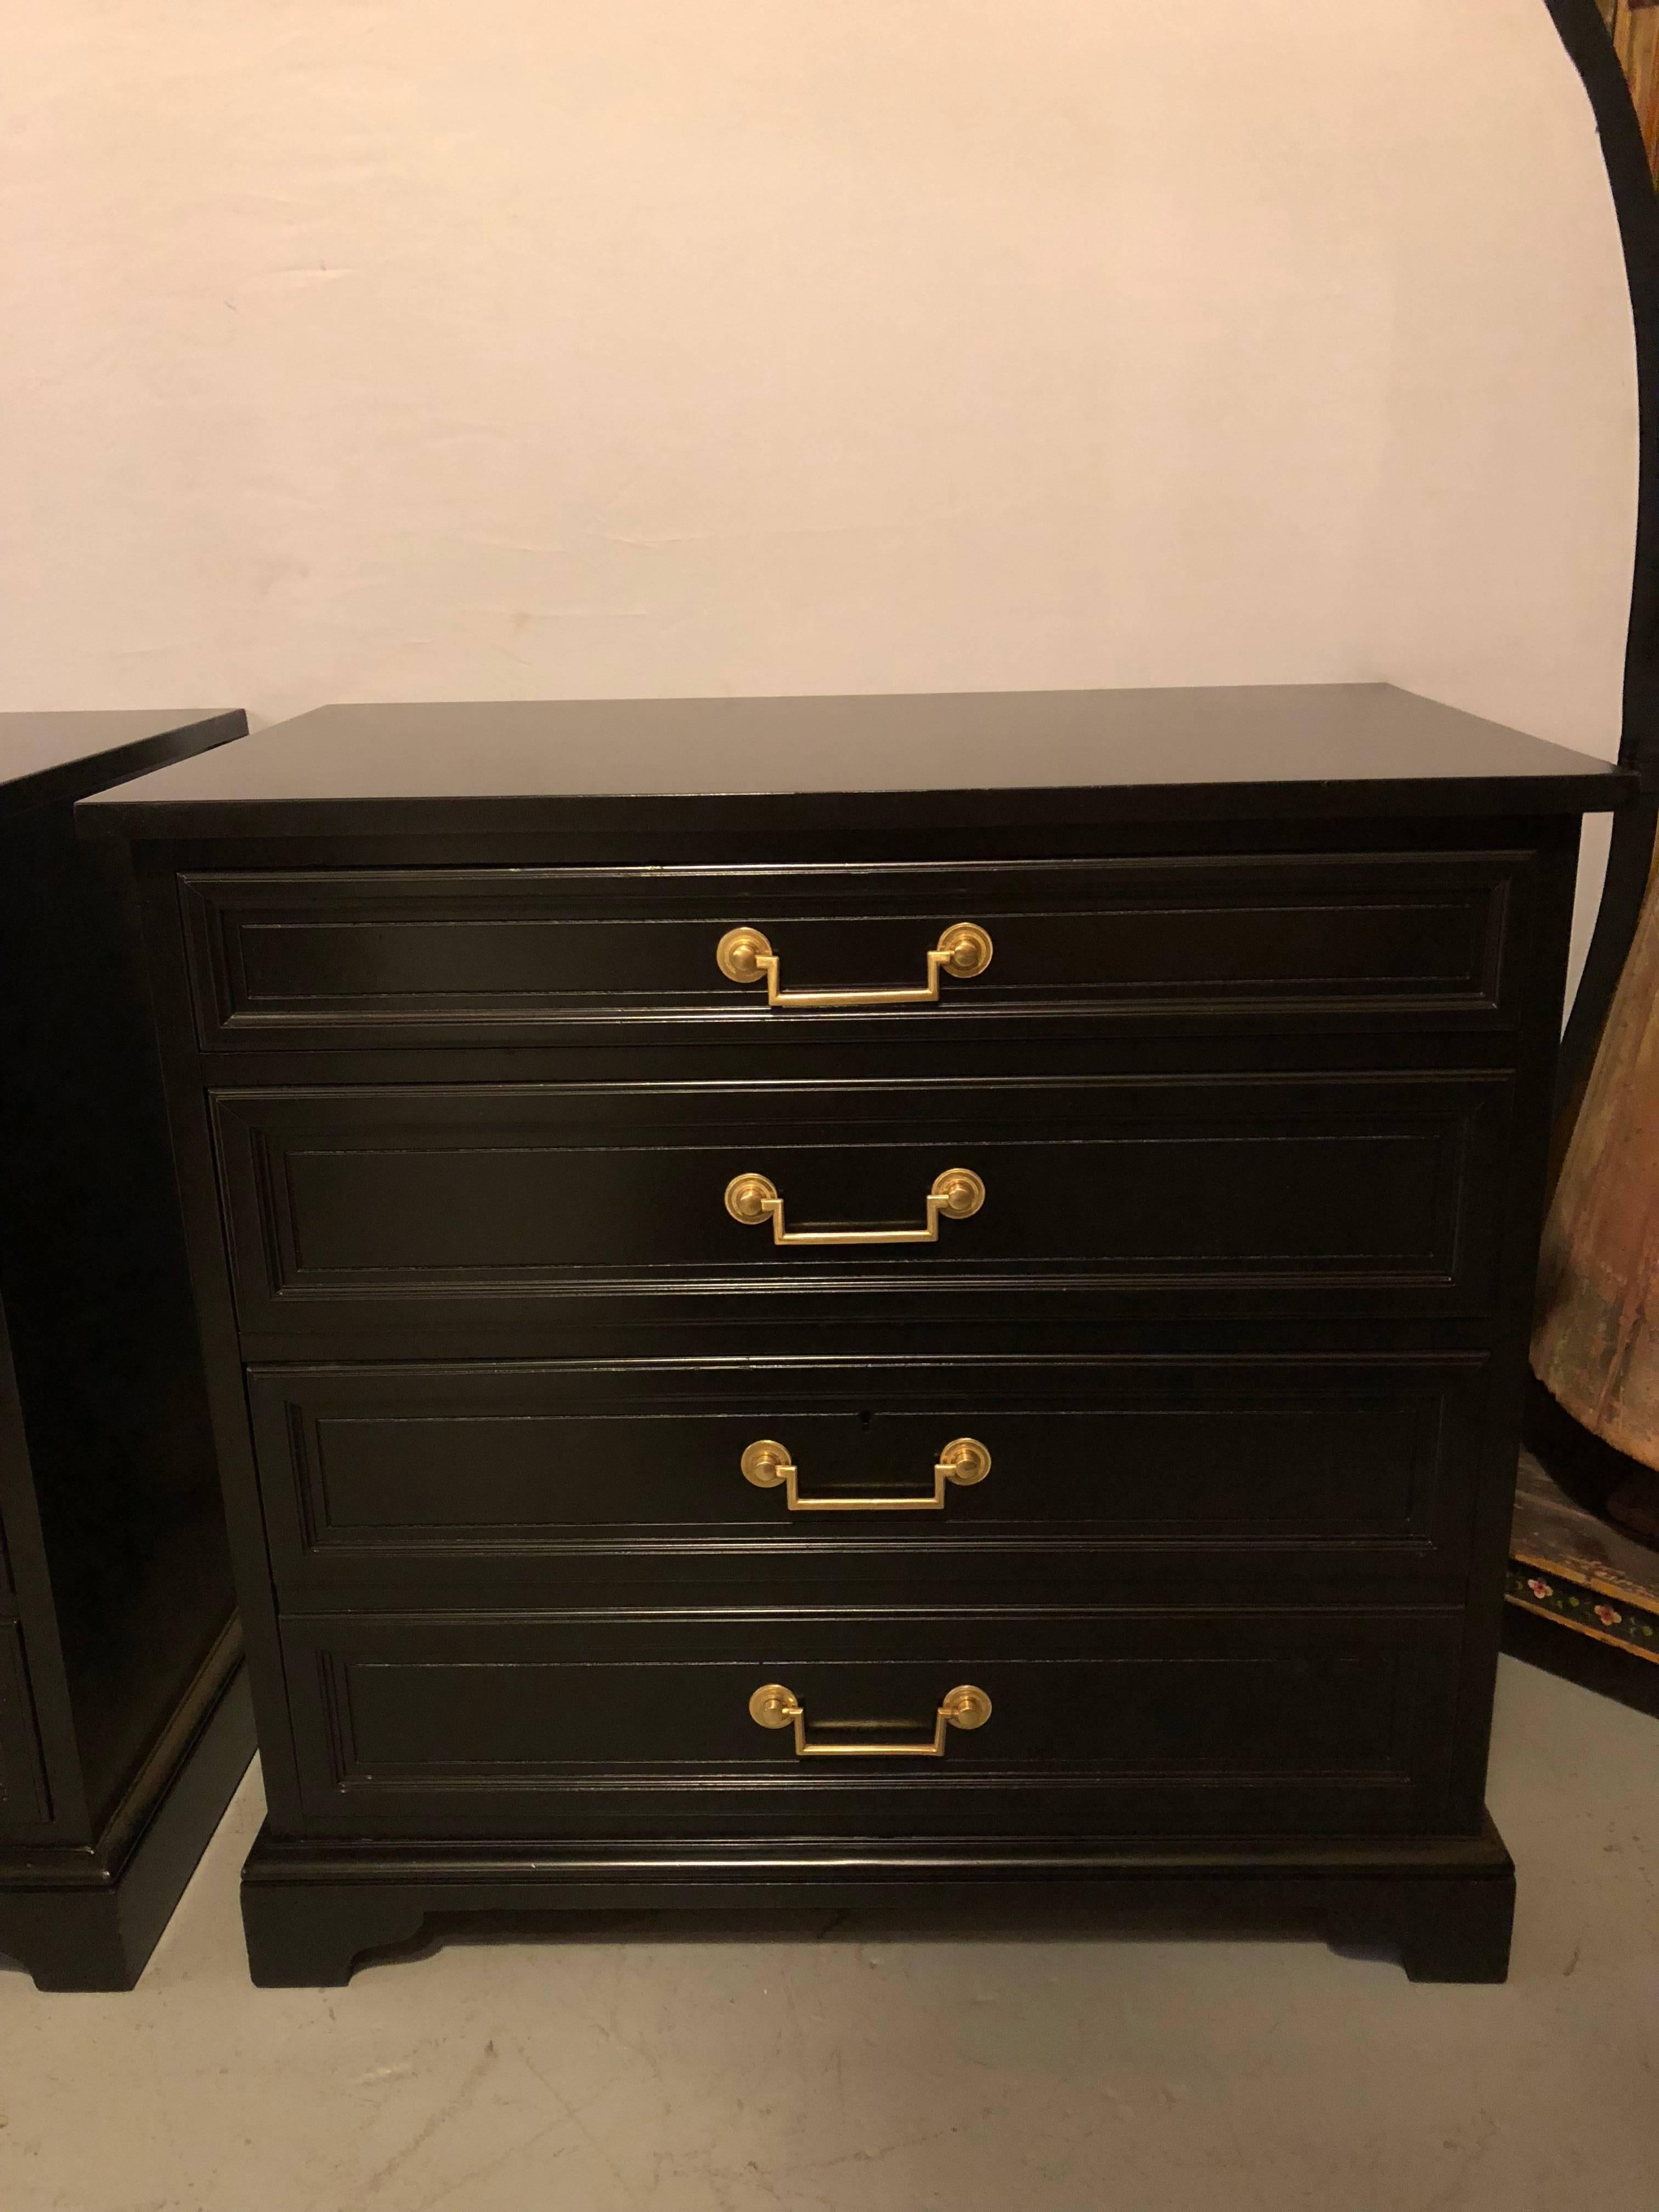 Pair of ebony office chests by Baker Furniture company with solid brass handles. Each Hollywood Regency style chest having that Baker quality with oak secondaries. The four drawer appearance having lower file cabinet holder as well as an incredible